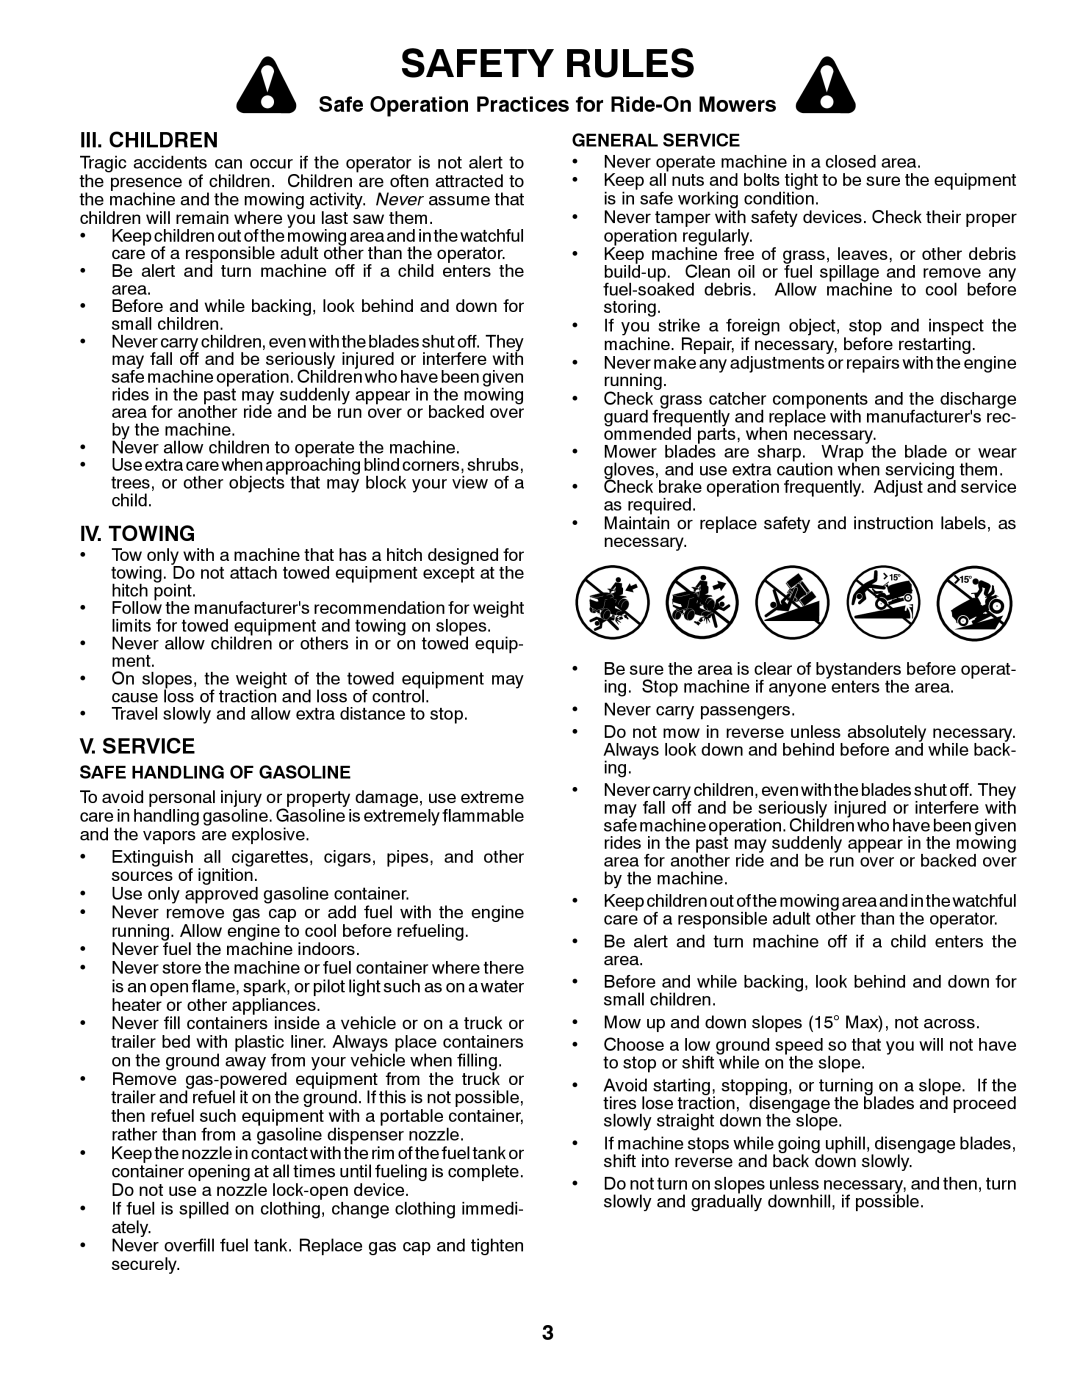 Husqvarna 2748 GLS (CA) Iii. Children, Iv. Towing, V. Service, Safety Rules, Safe Operation Practices for Ride-OnMowers 